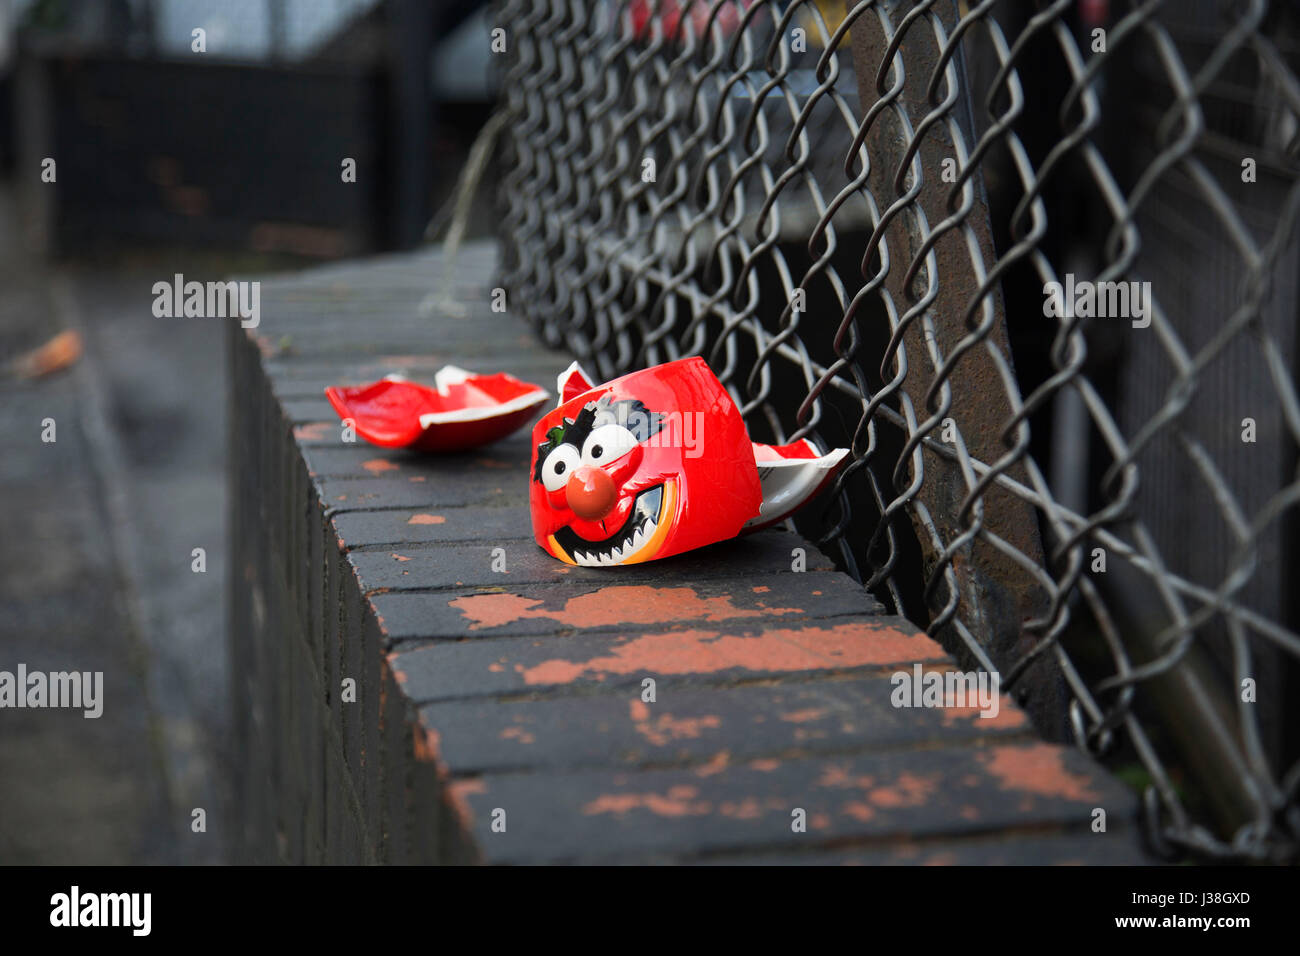 Broken mug of the Animal character from the Muppets on a wall in Birmingham, England, United Kingdom. Stock Photo